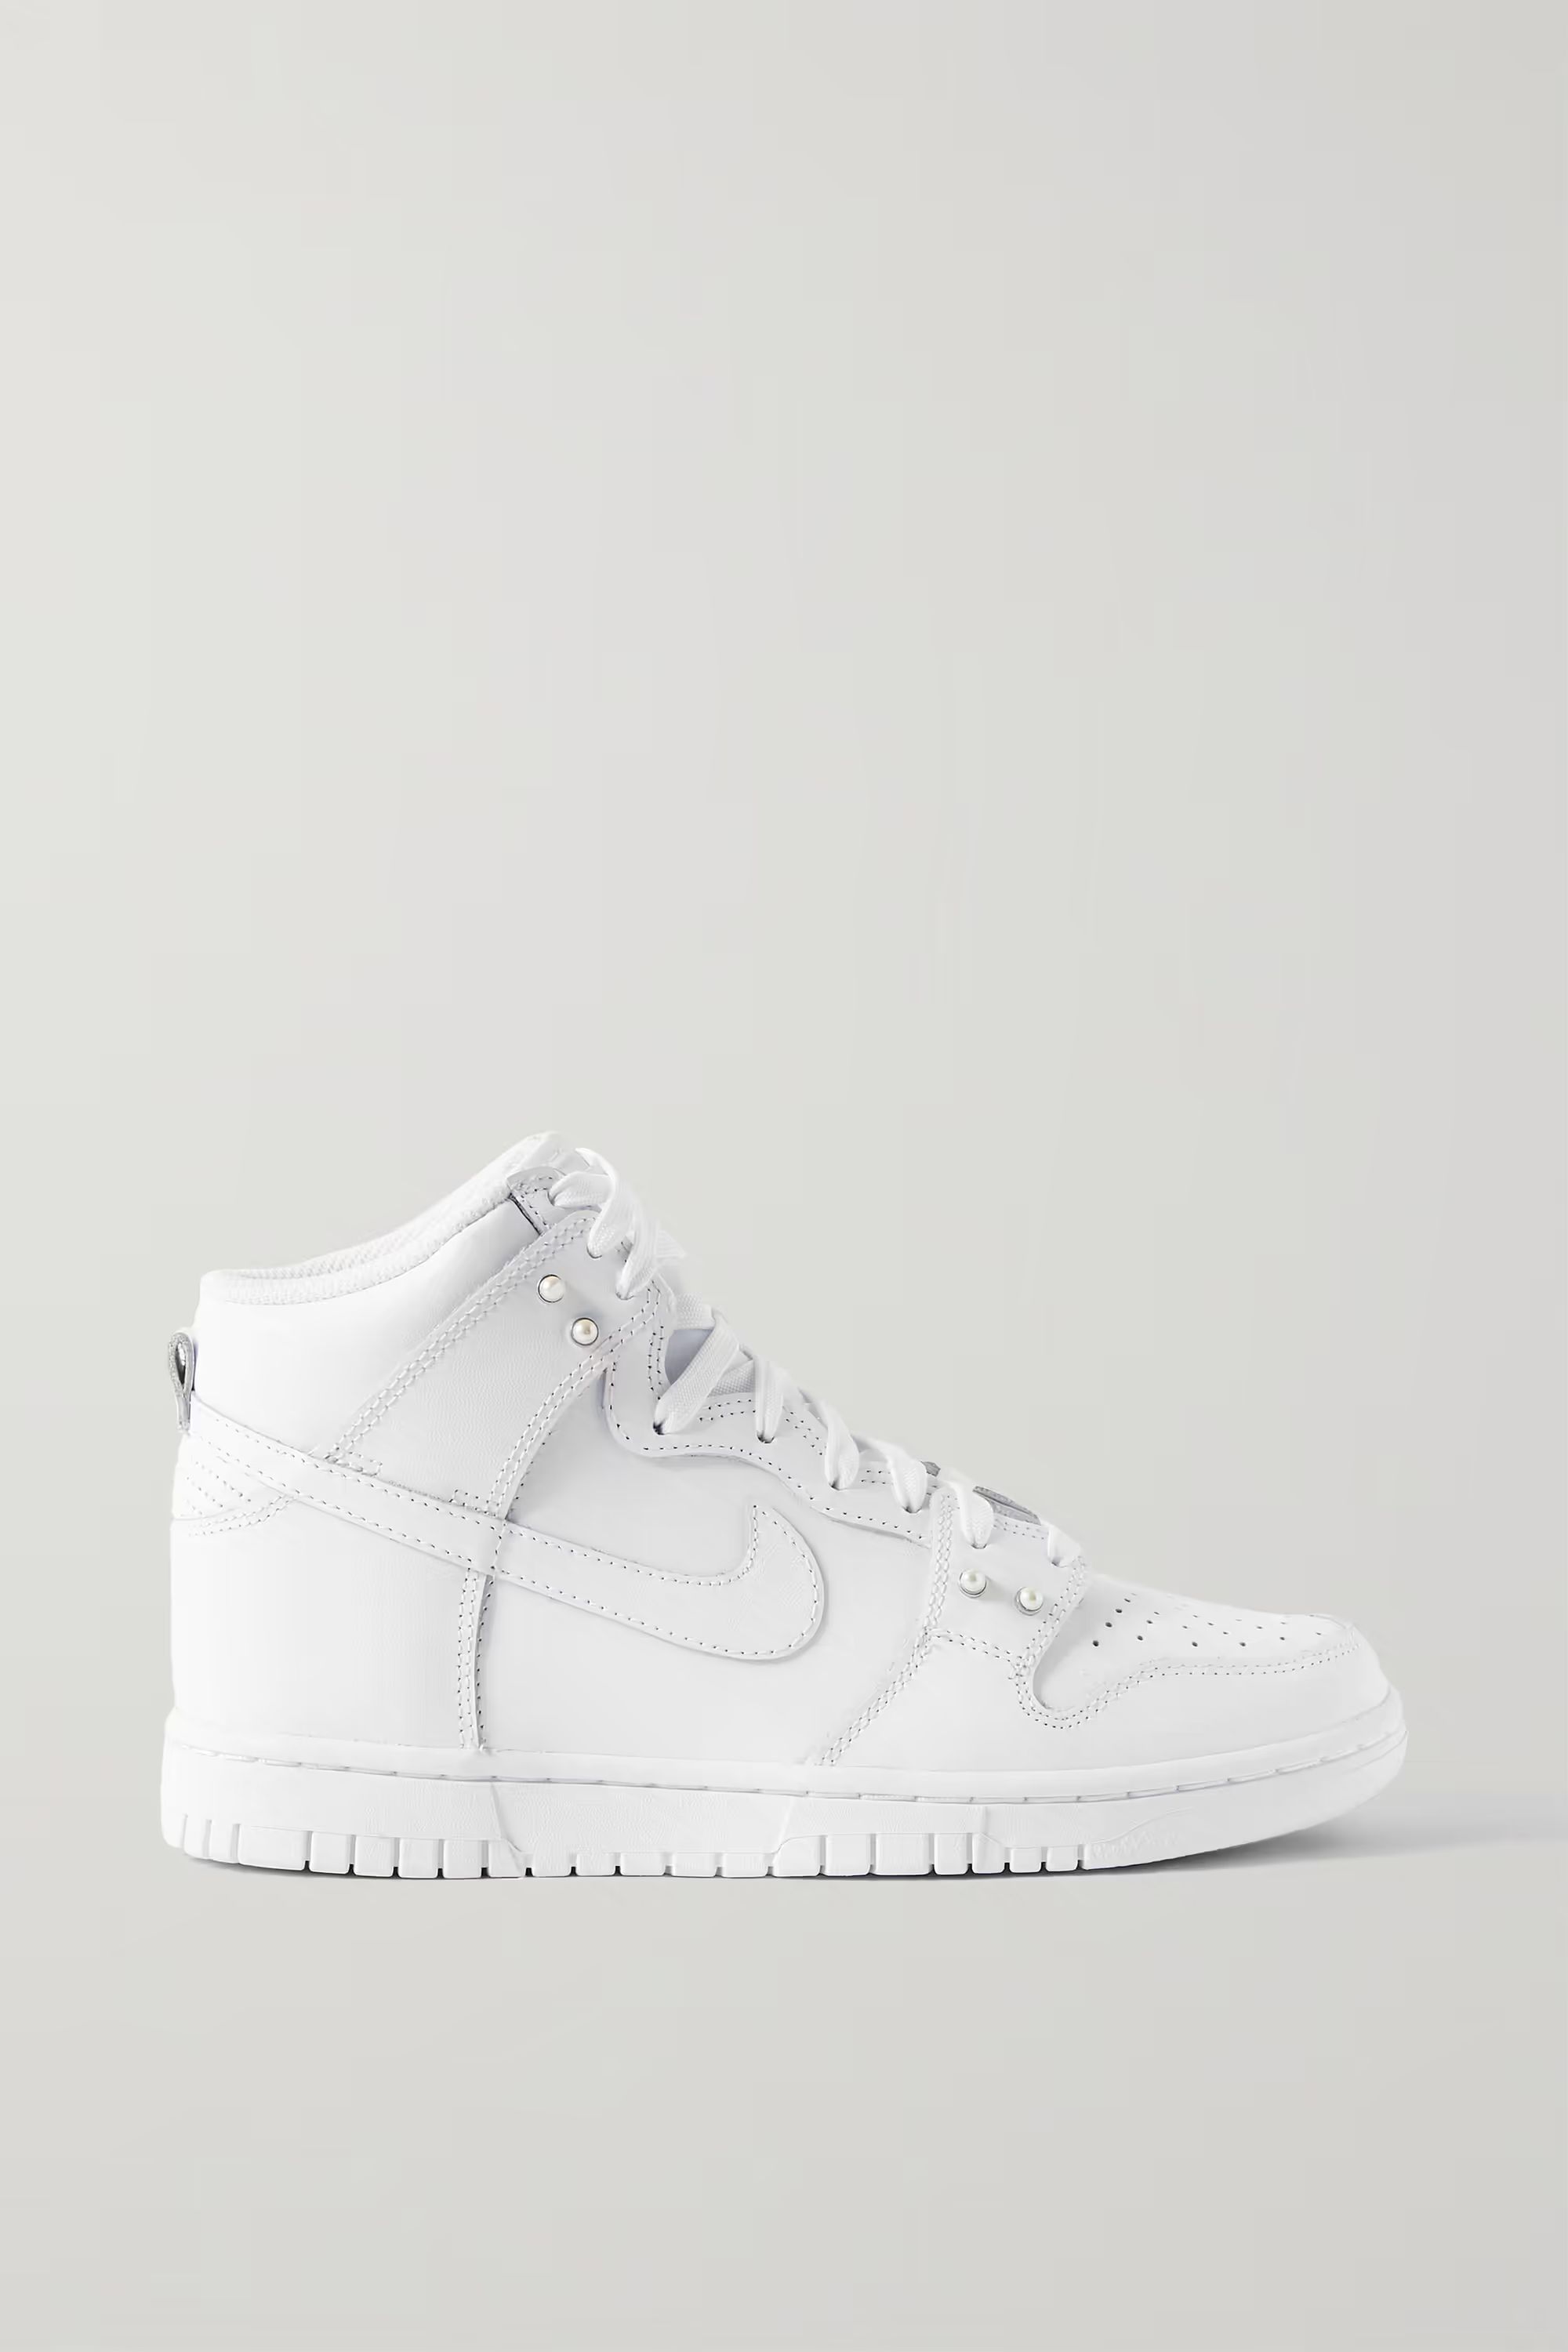 Dunk High embellished leather high-top sneakers | NET-A-PORTER (US)